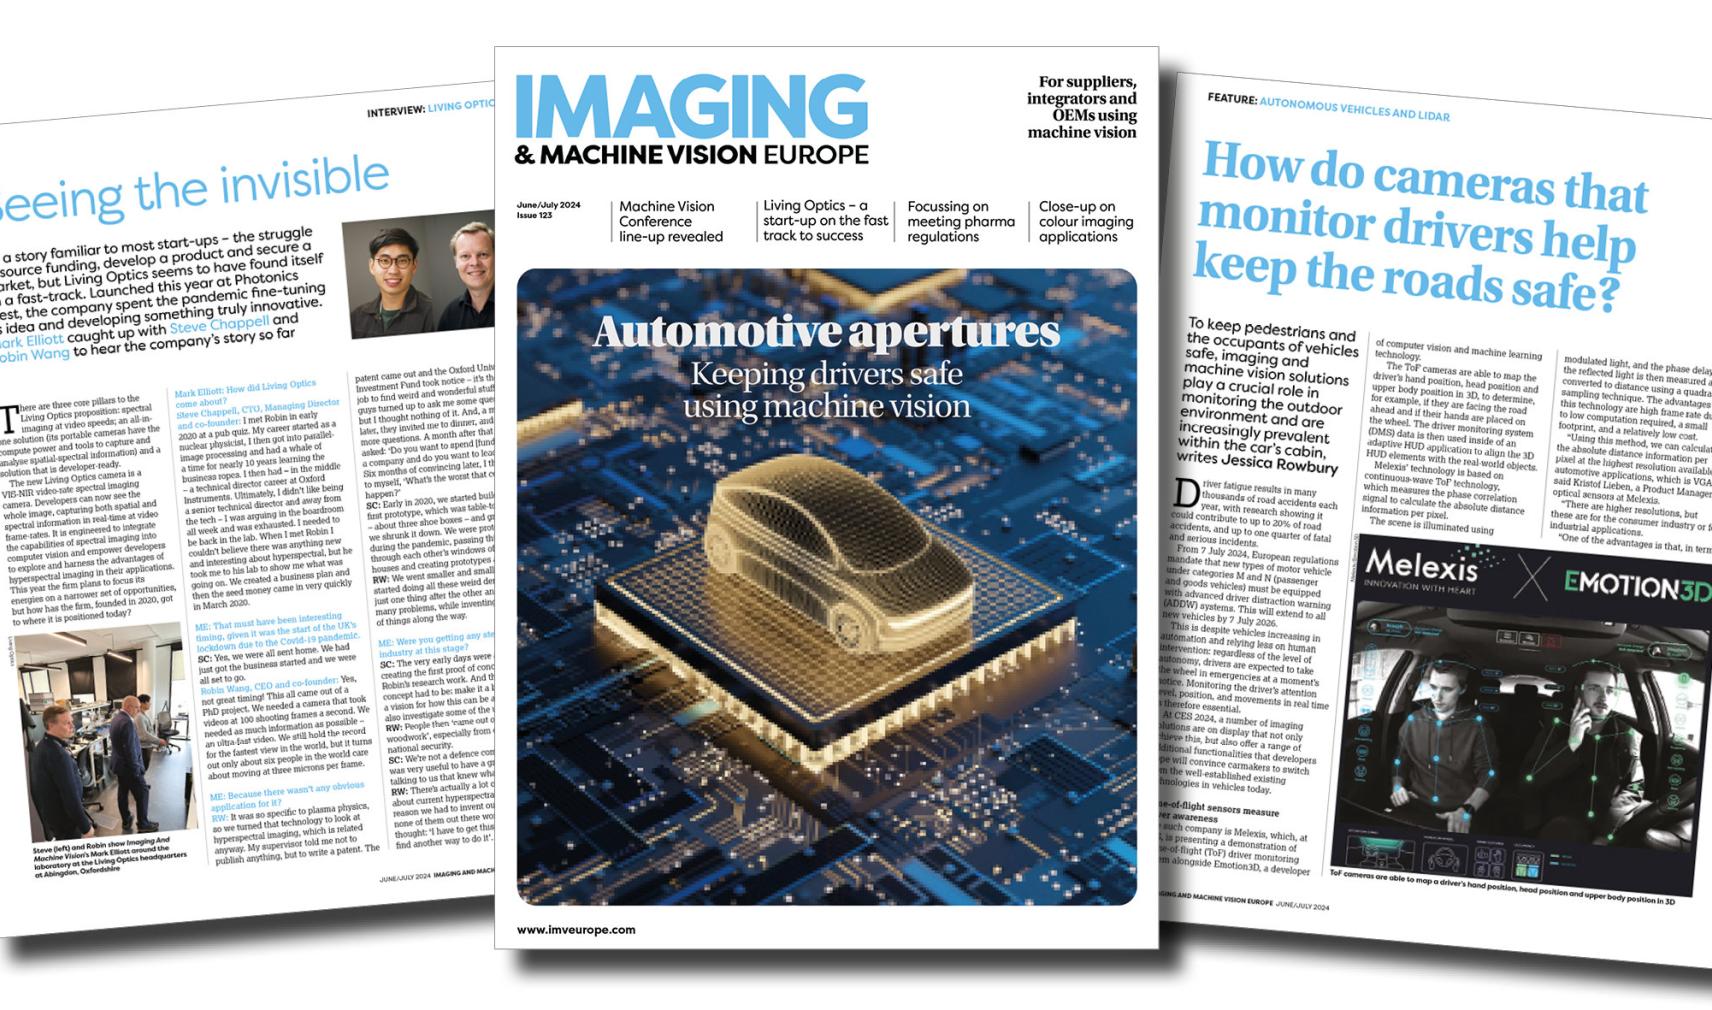 Imaging and Machine Vision Europe magazine is out now